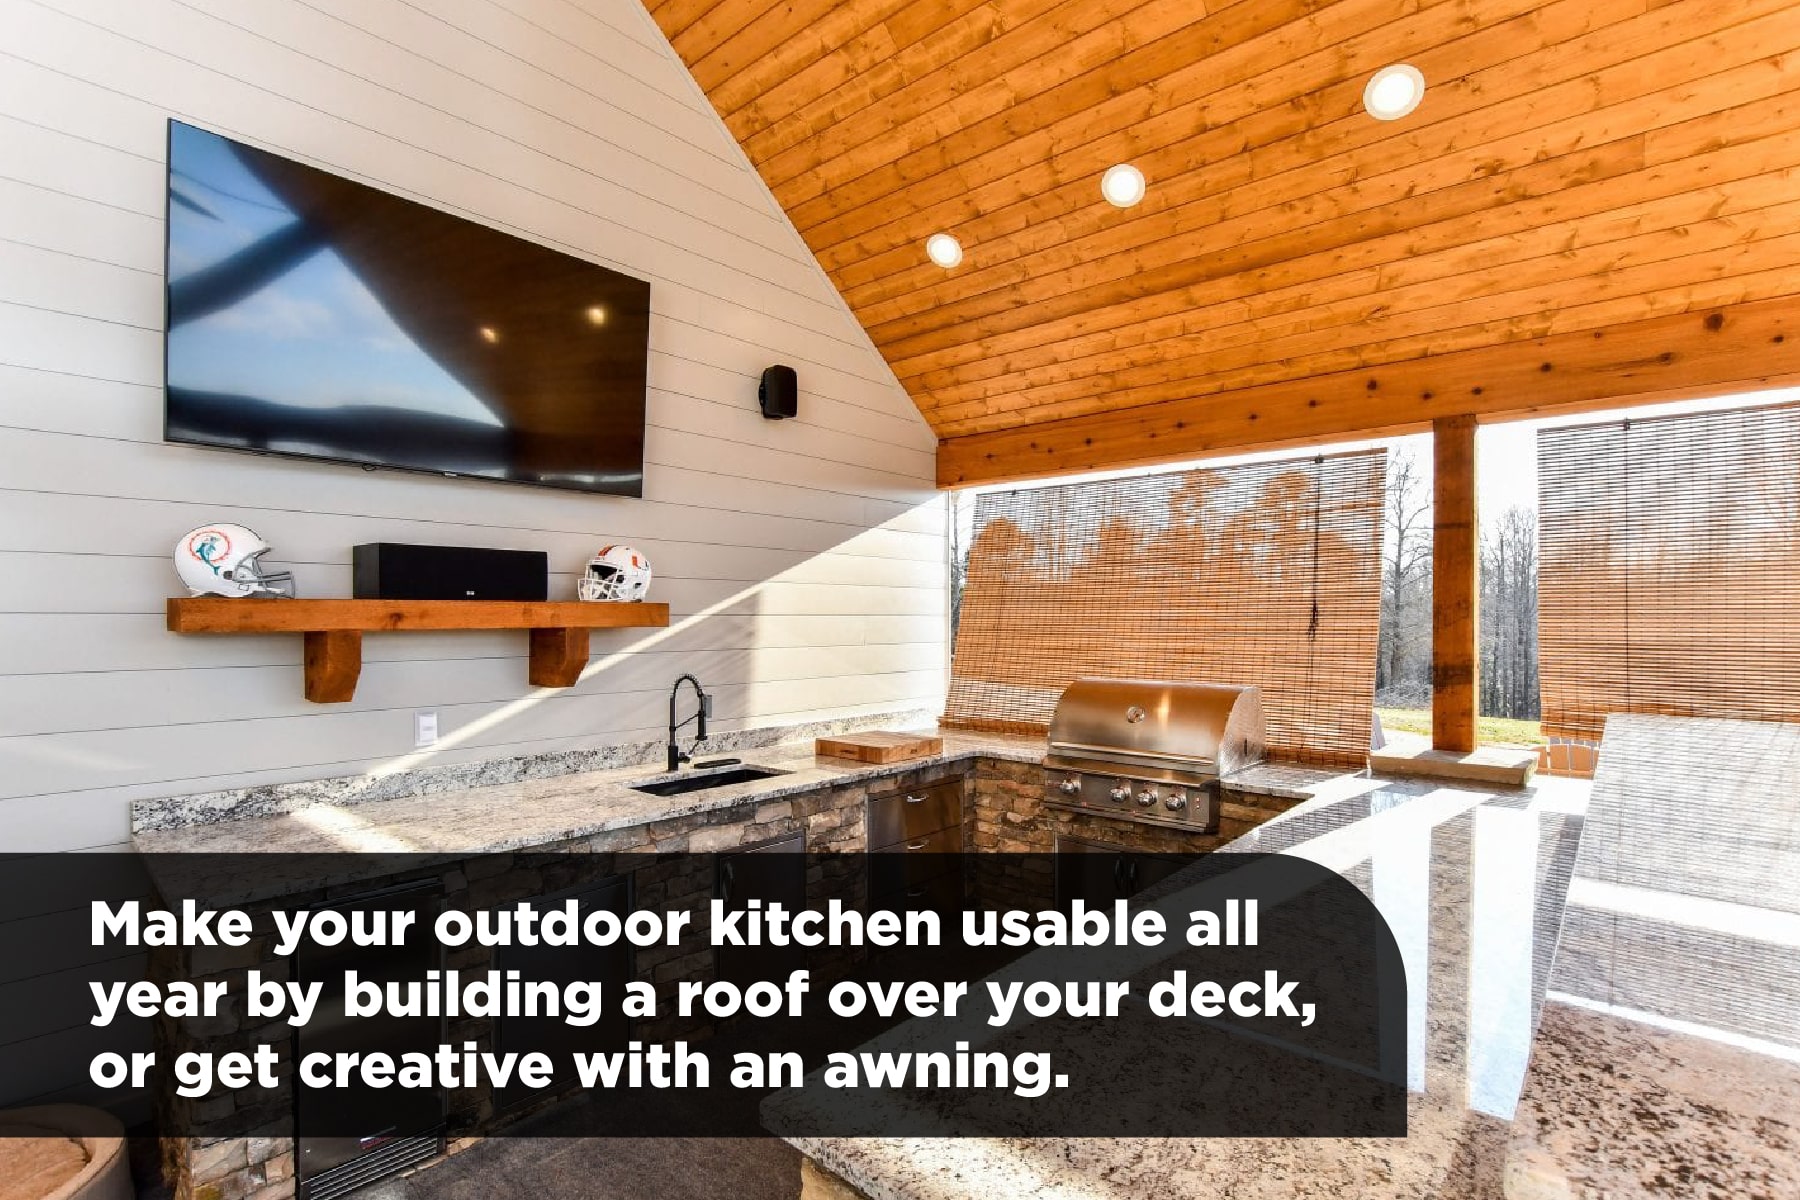 A roof over an outdoor kitchen makes it usable all year long